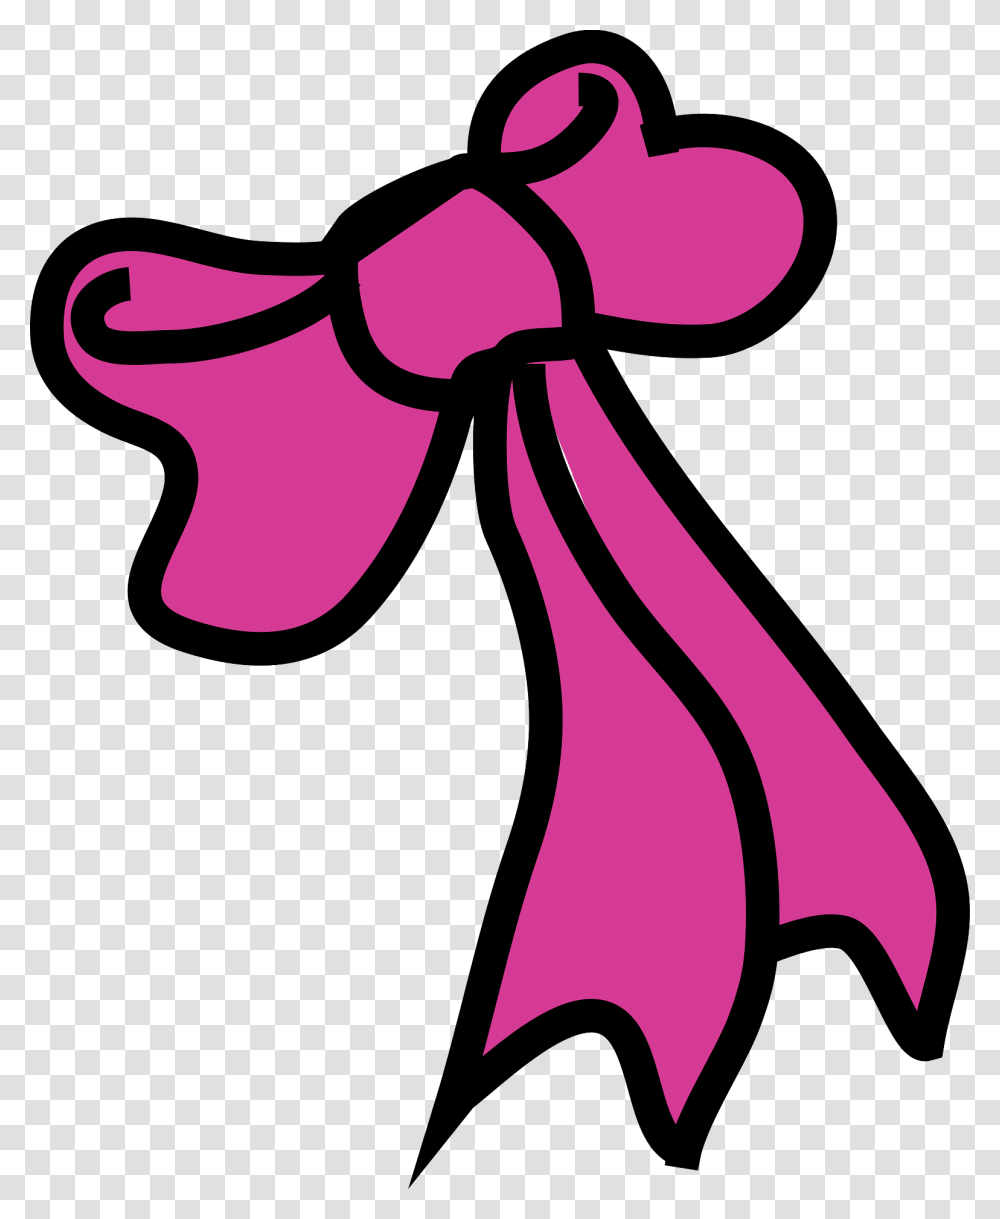 Bow Pink Ribbon Free Vector Graphic On Pixabay Pita Ulang Tahun, Tie, Accessories, Accessory, Necktie Transparent Png